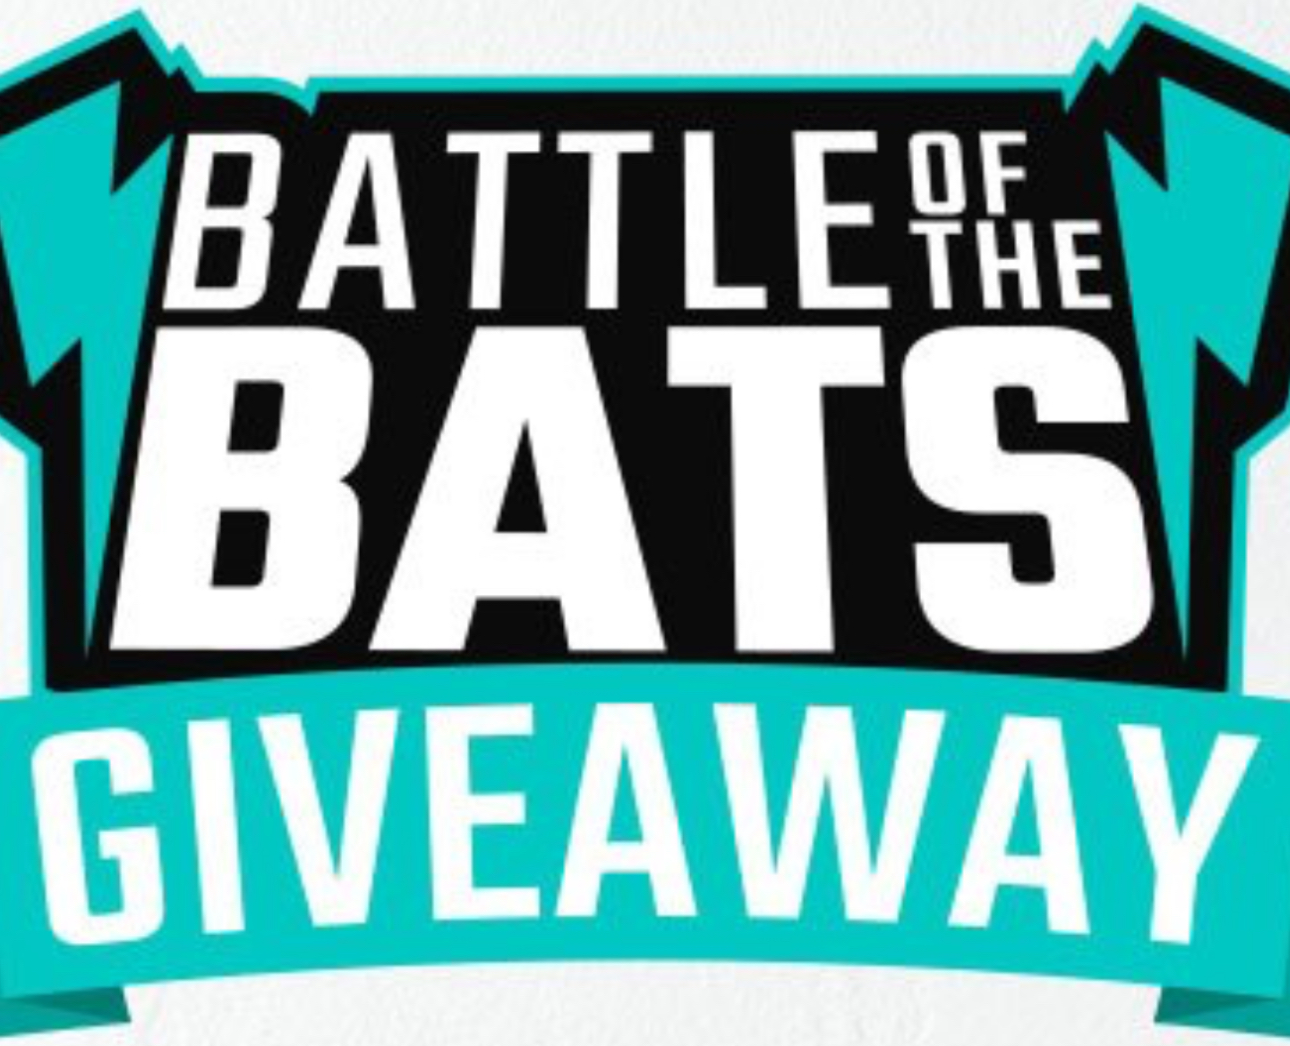 South Bay BATTLE OF THE BATS - GIVEAWAY Logo